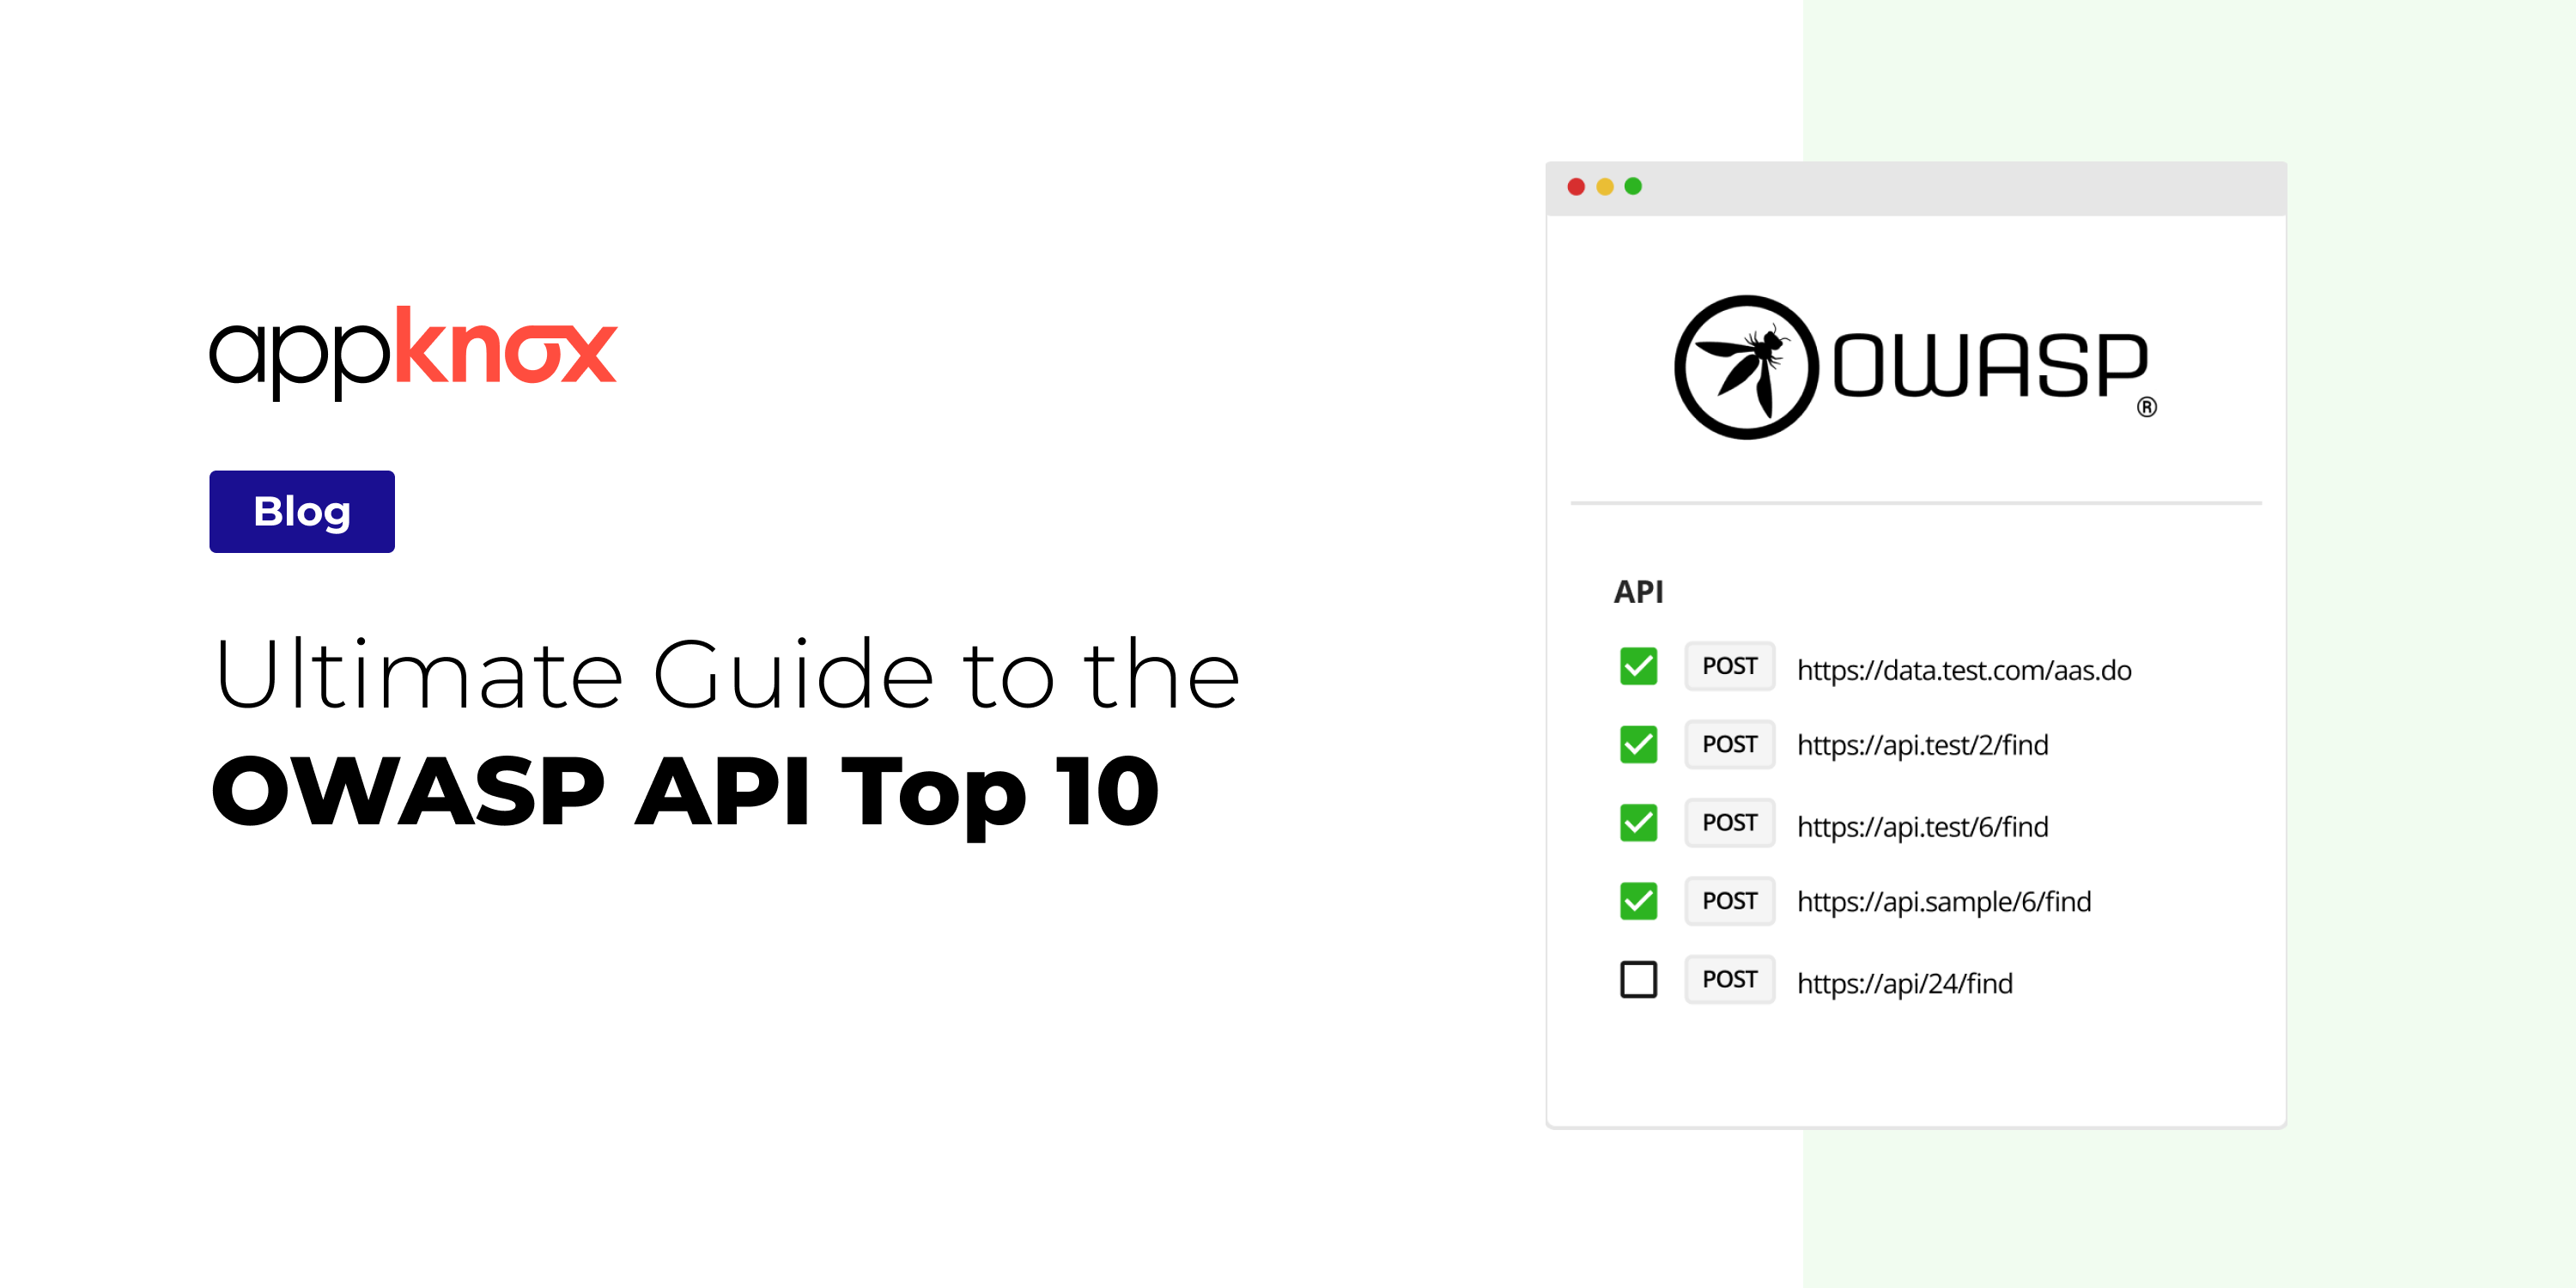 OWASP Top 10 Ultimate Guide for API Security